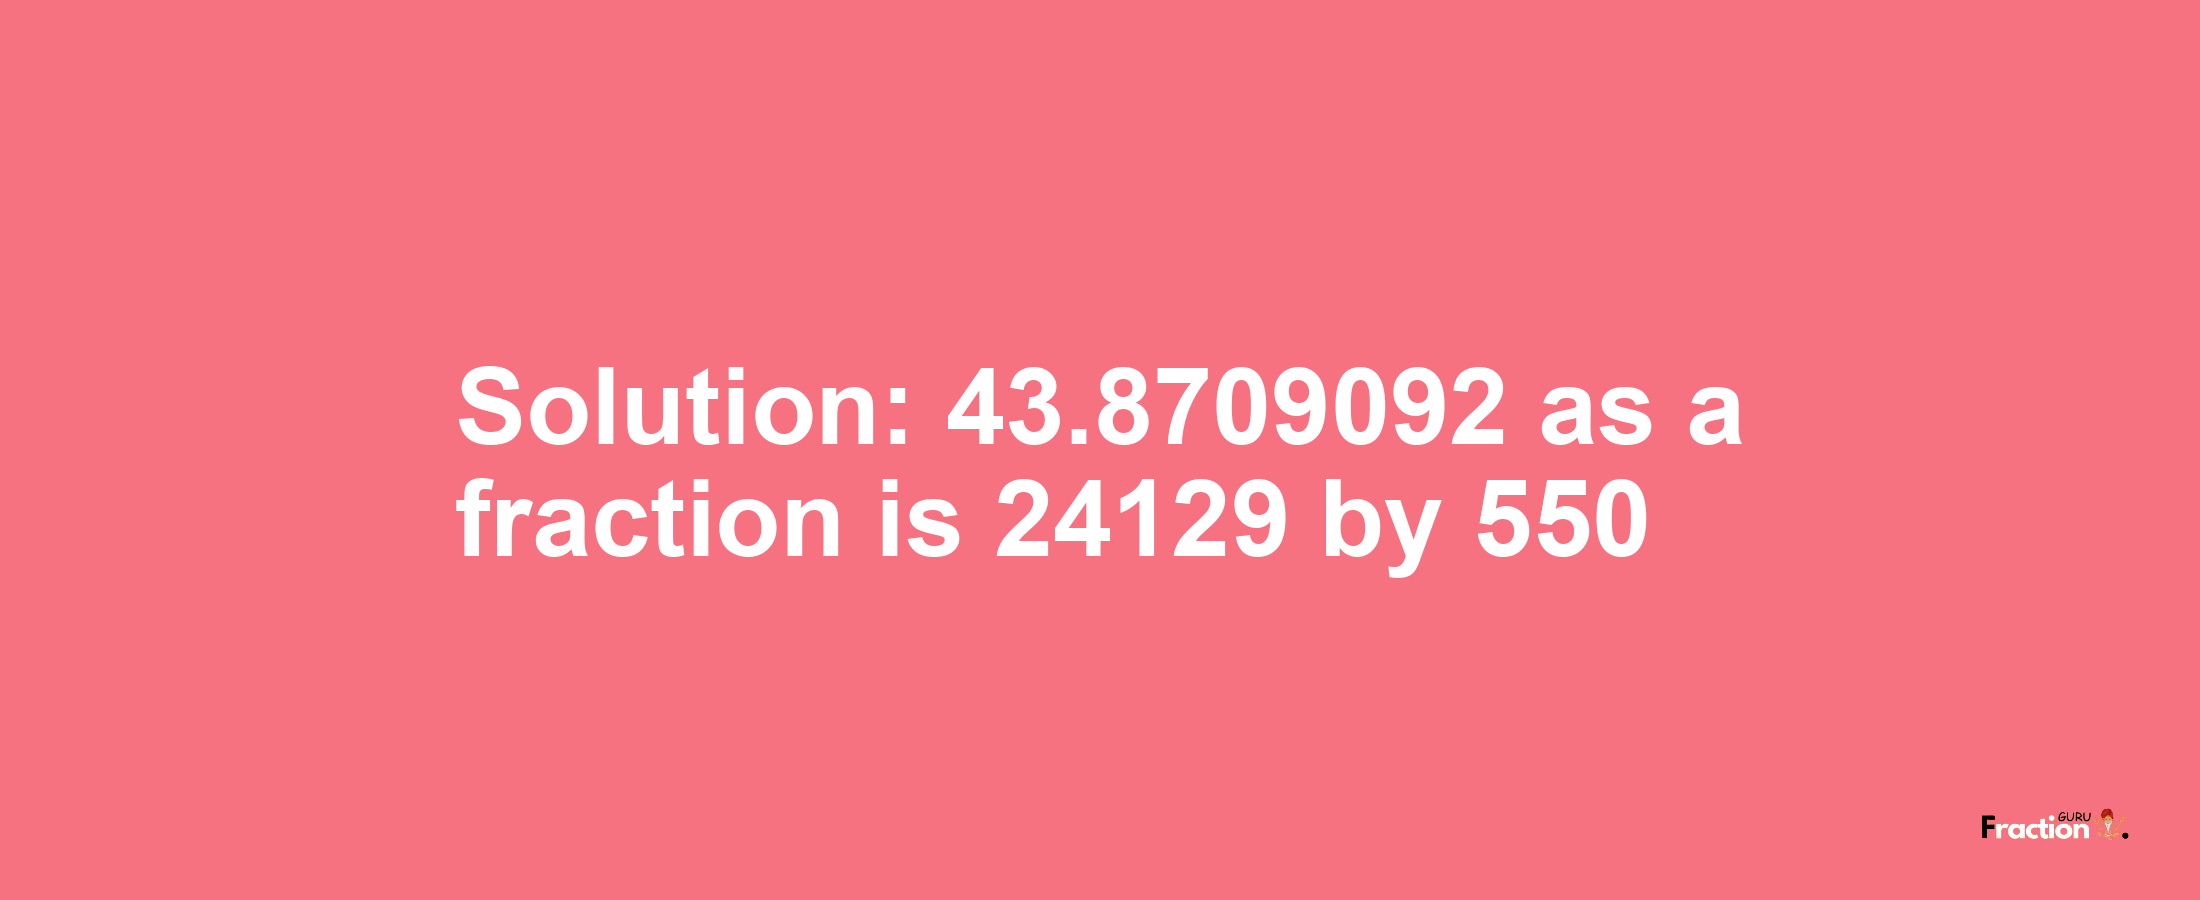 Solution:43.8709092 as a fraction is 24129/550